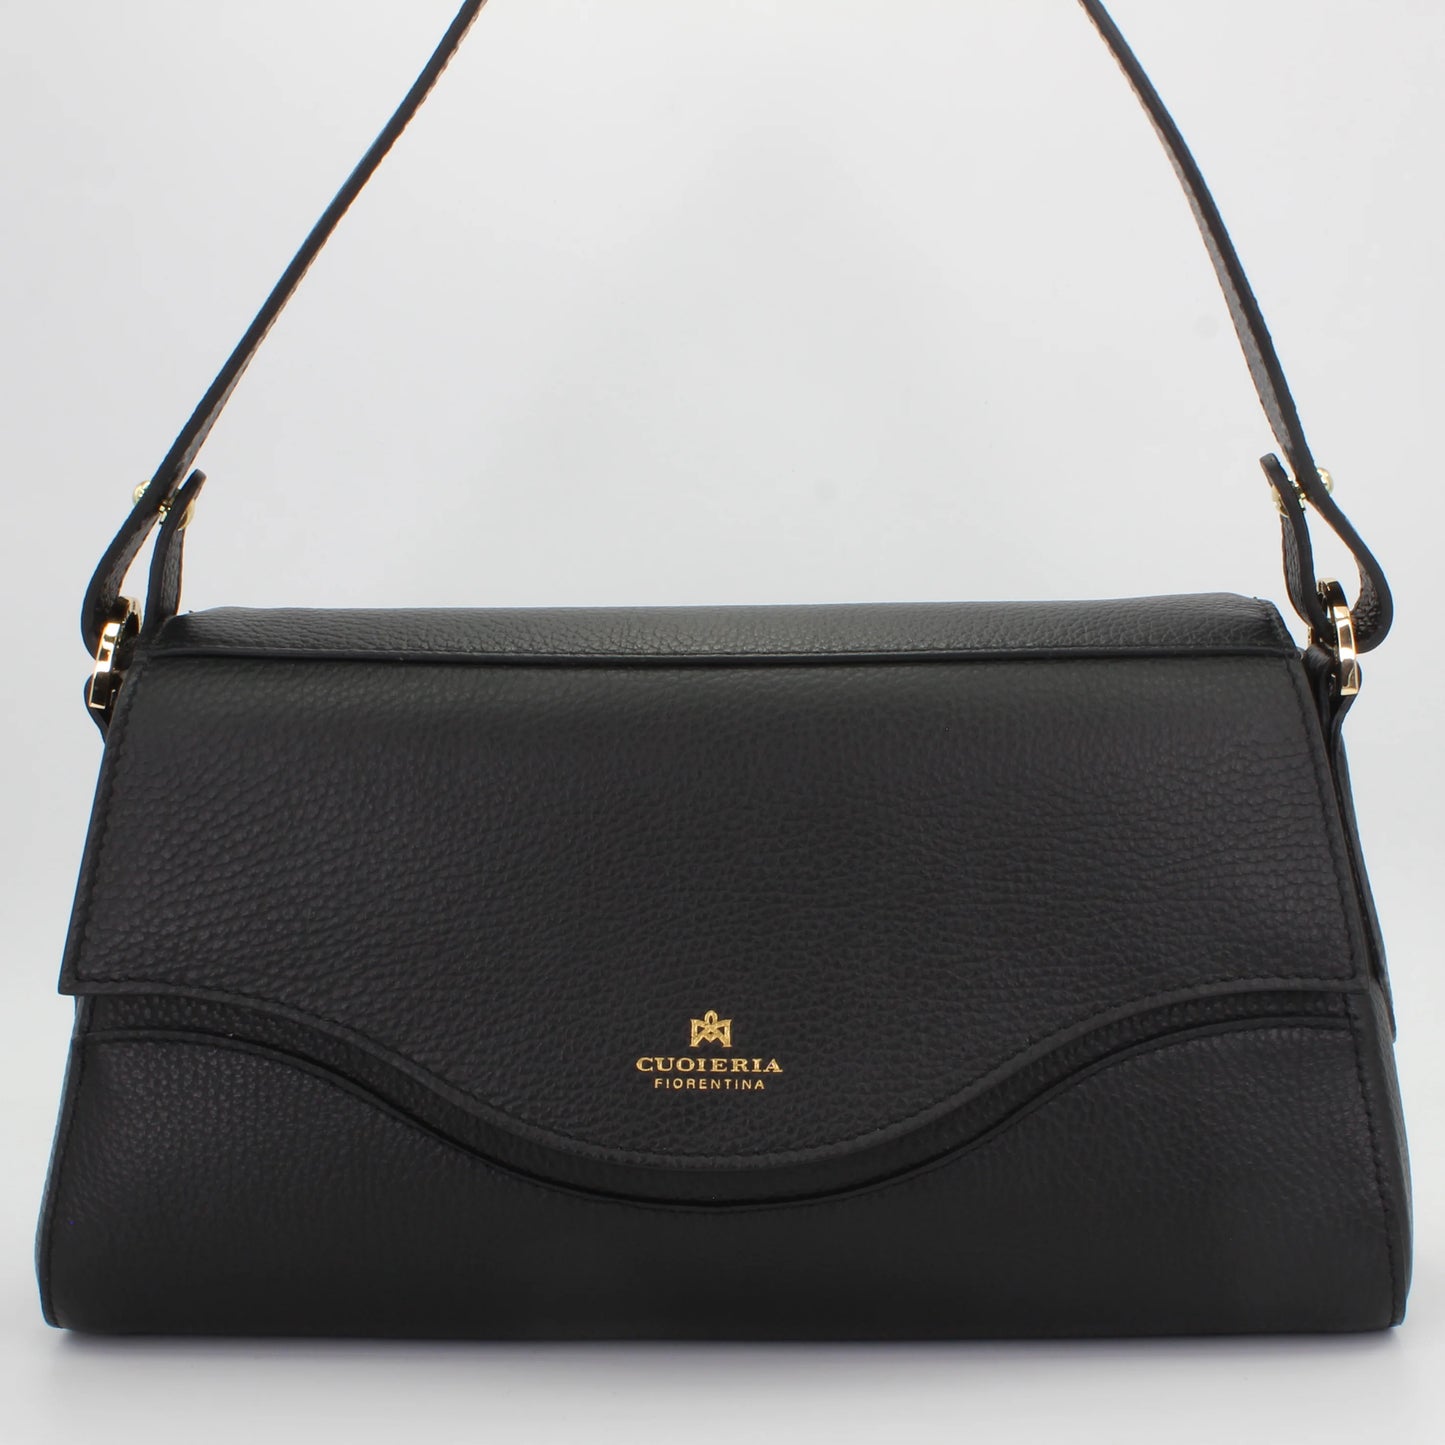 Shop Womens Italian-made Leather shoulder handbag in nero (B000005939230) or browse our range of hand-made Italian handbags for women in-store at Aliverti Cape Town, or shop online.   We deliver in South Africa & offer multiple payment plans as well as accept multiple safe & secure payment methods.